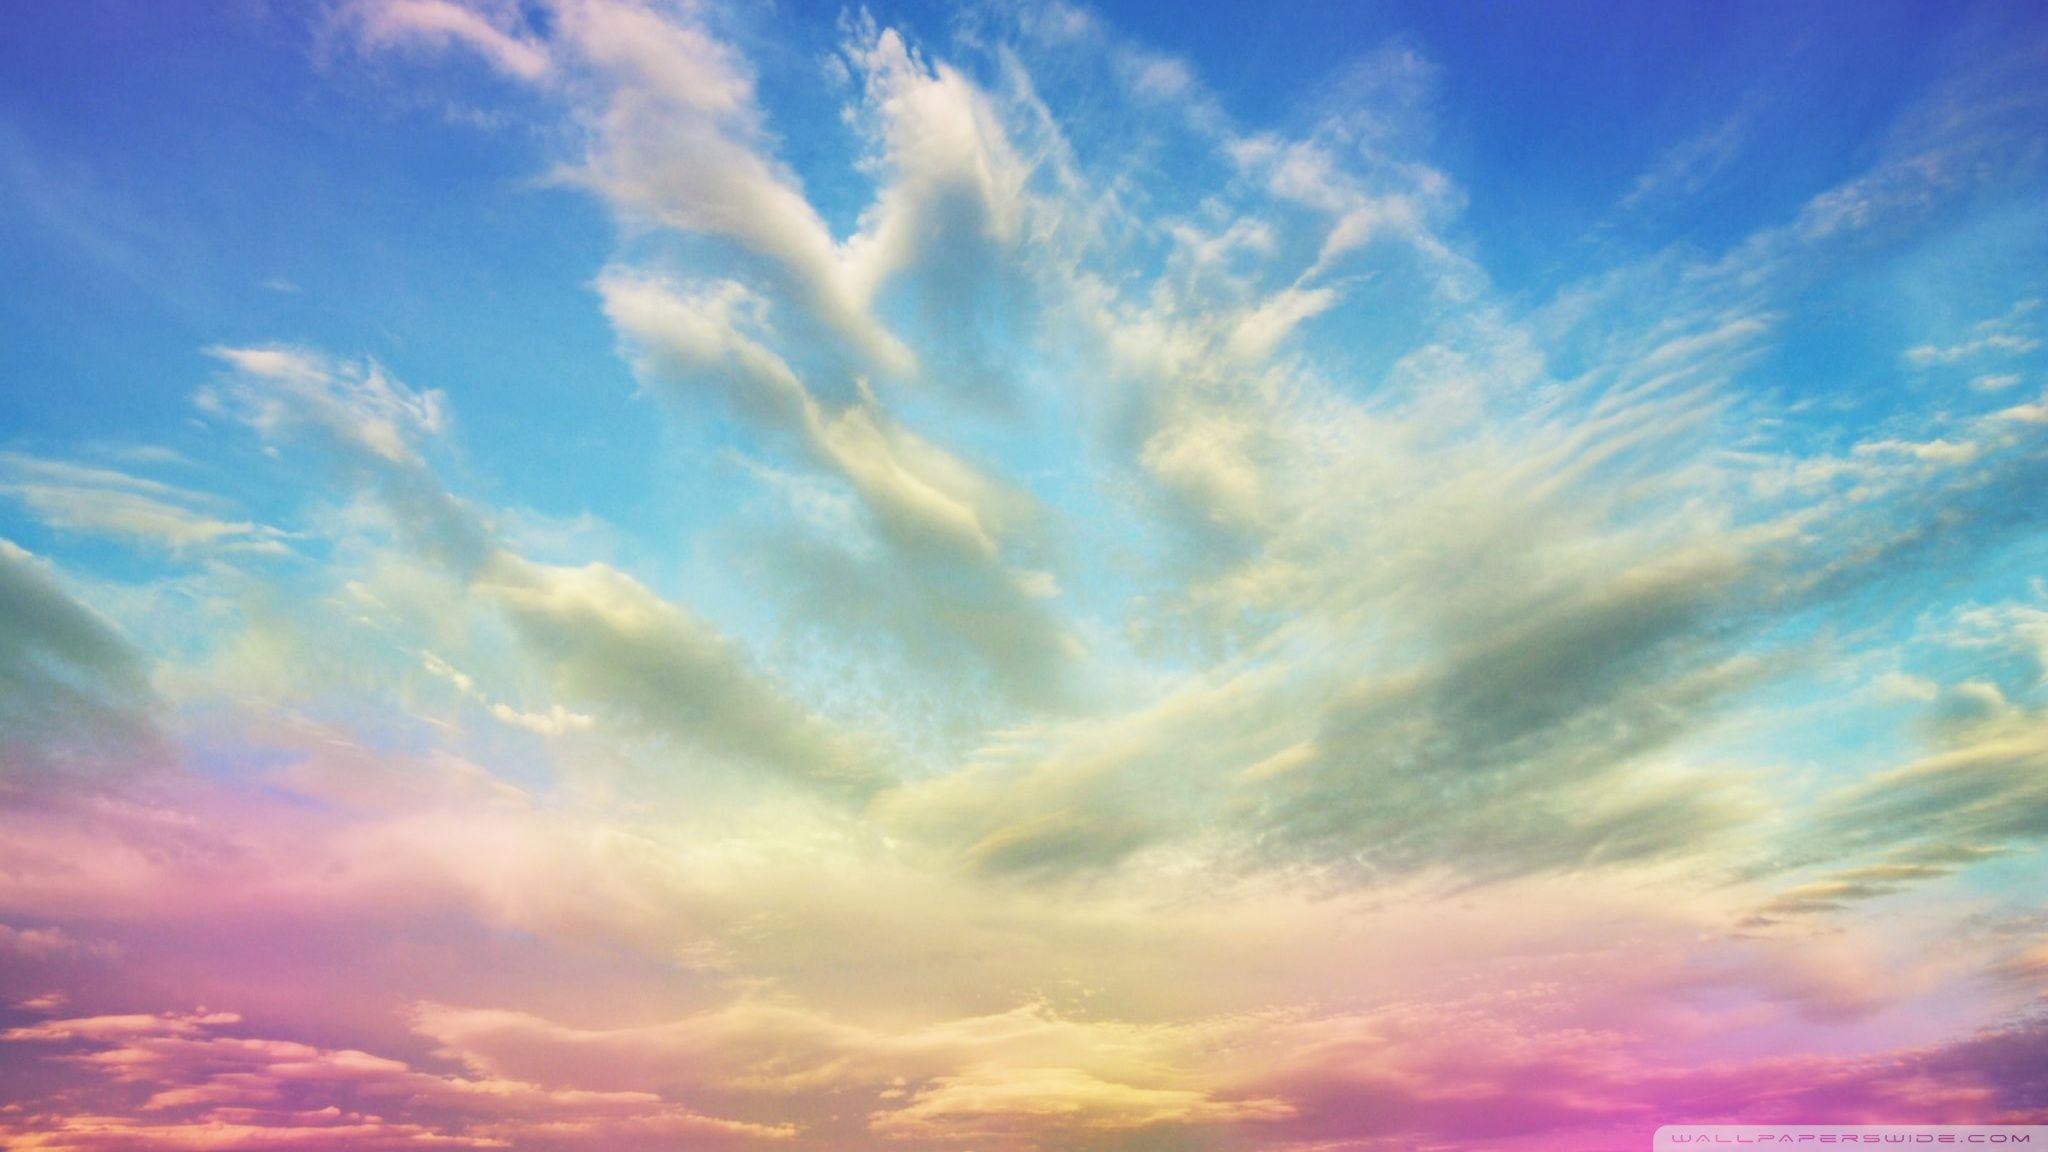 Sunrise Clouds Wallpapers  HD Wallpapers  ID 22908